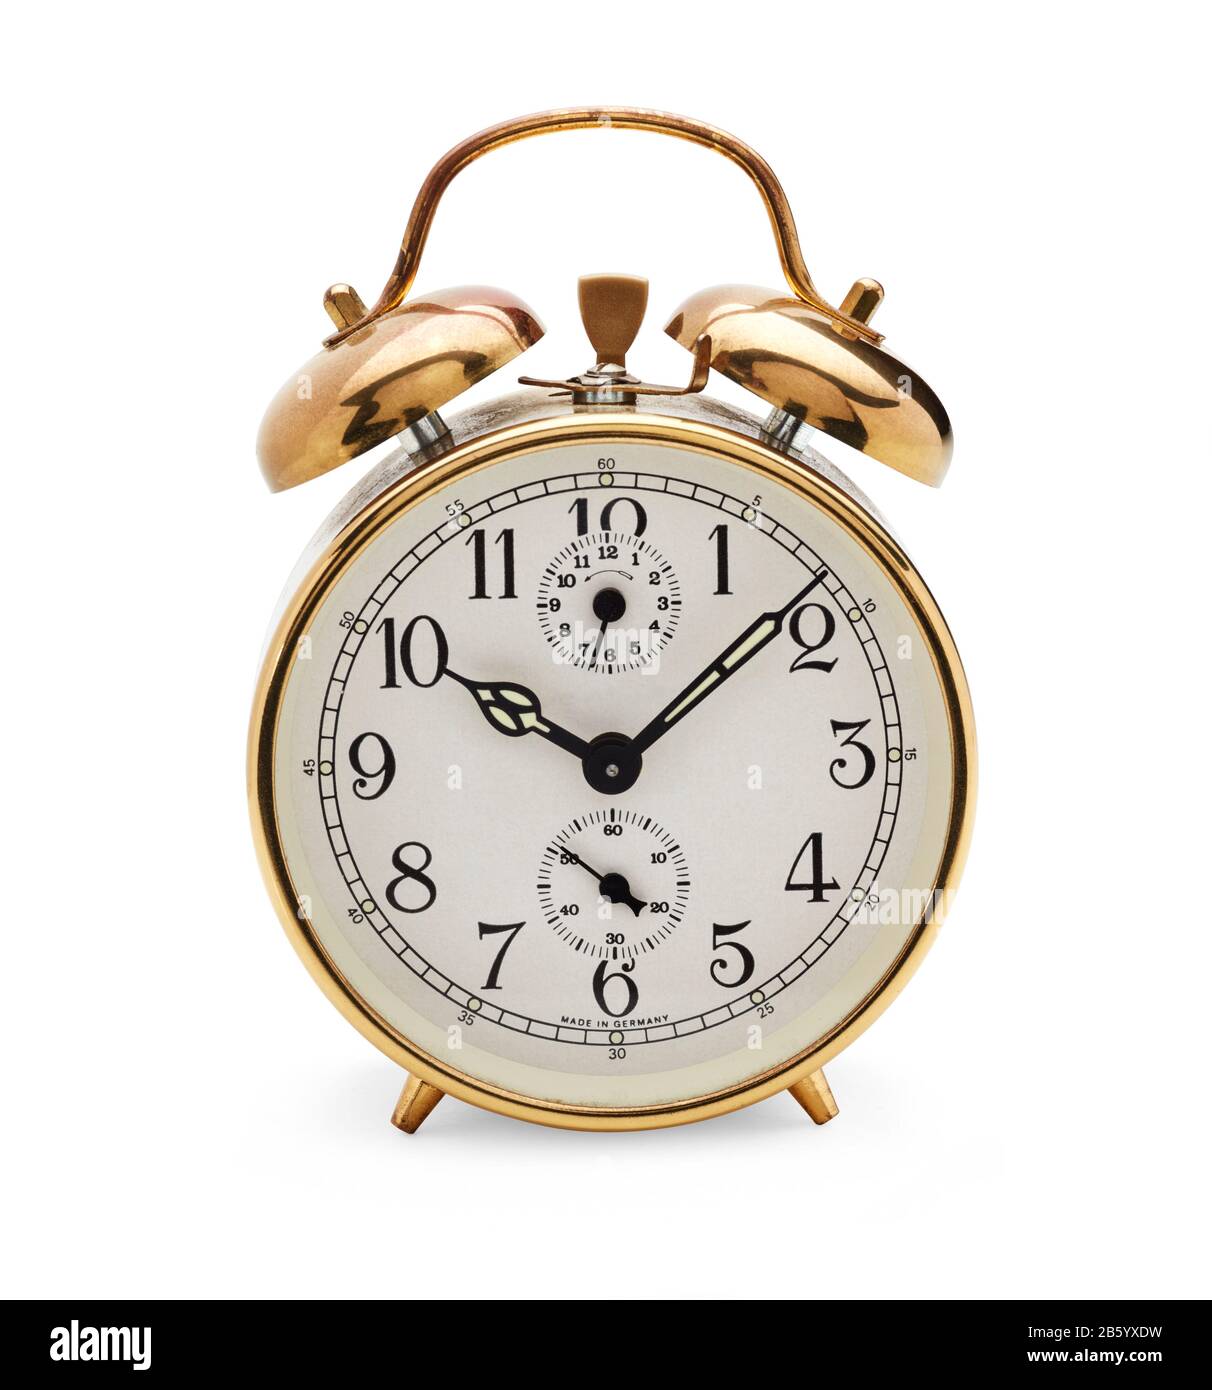 Old fashioned mechanical alarm clock with bells on top with hands at eight minutes past ten Stock Photo